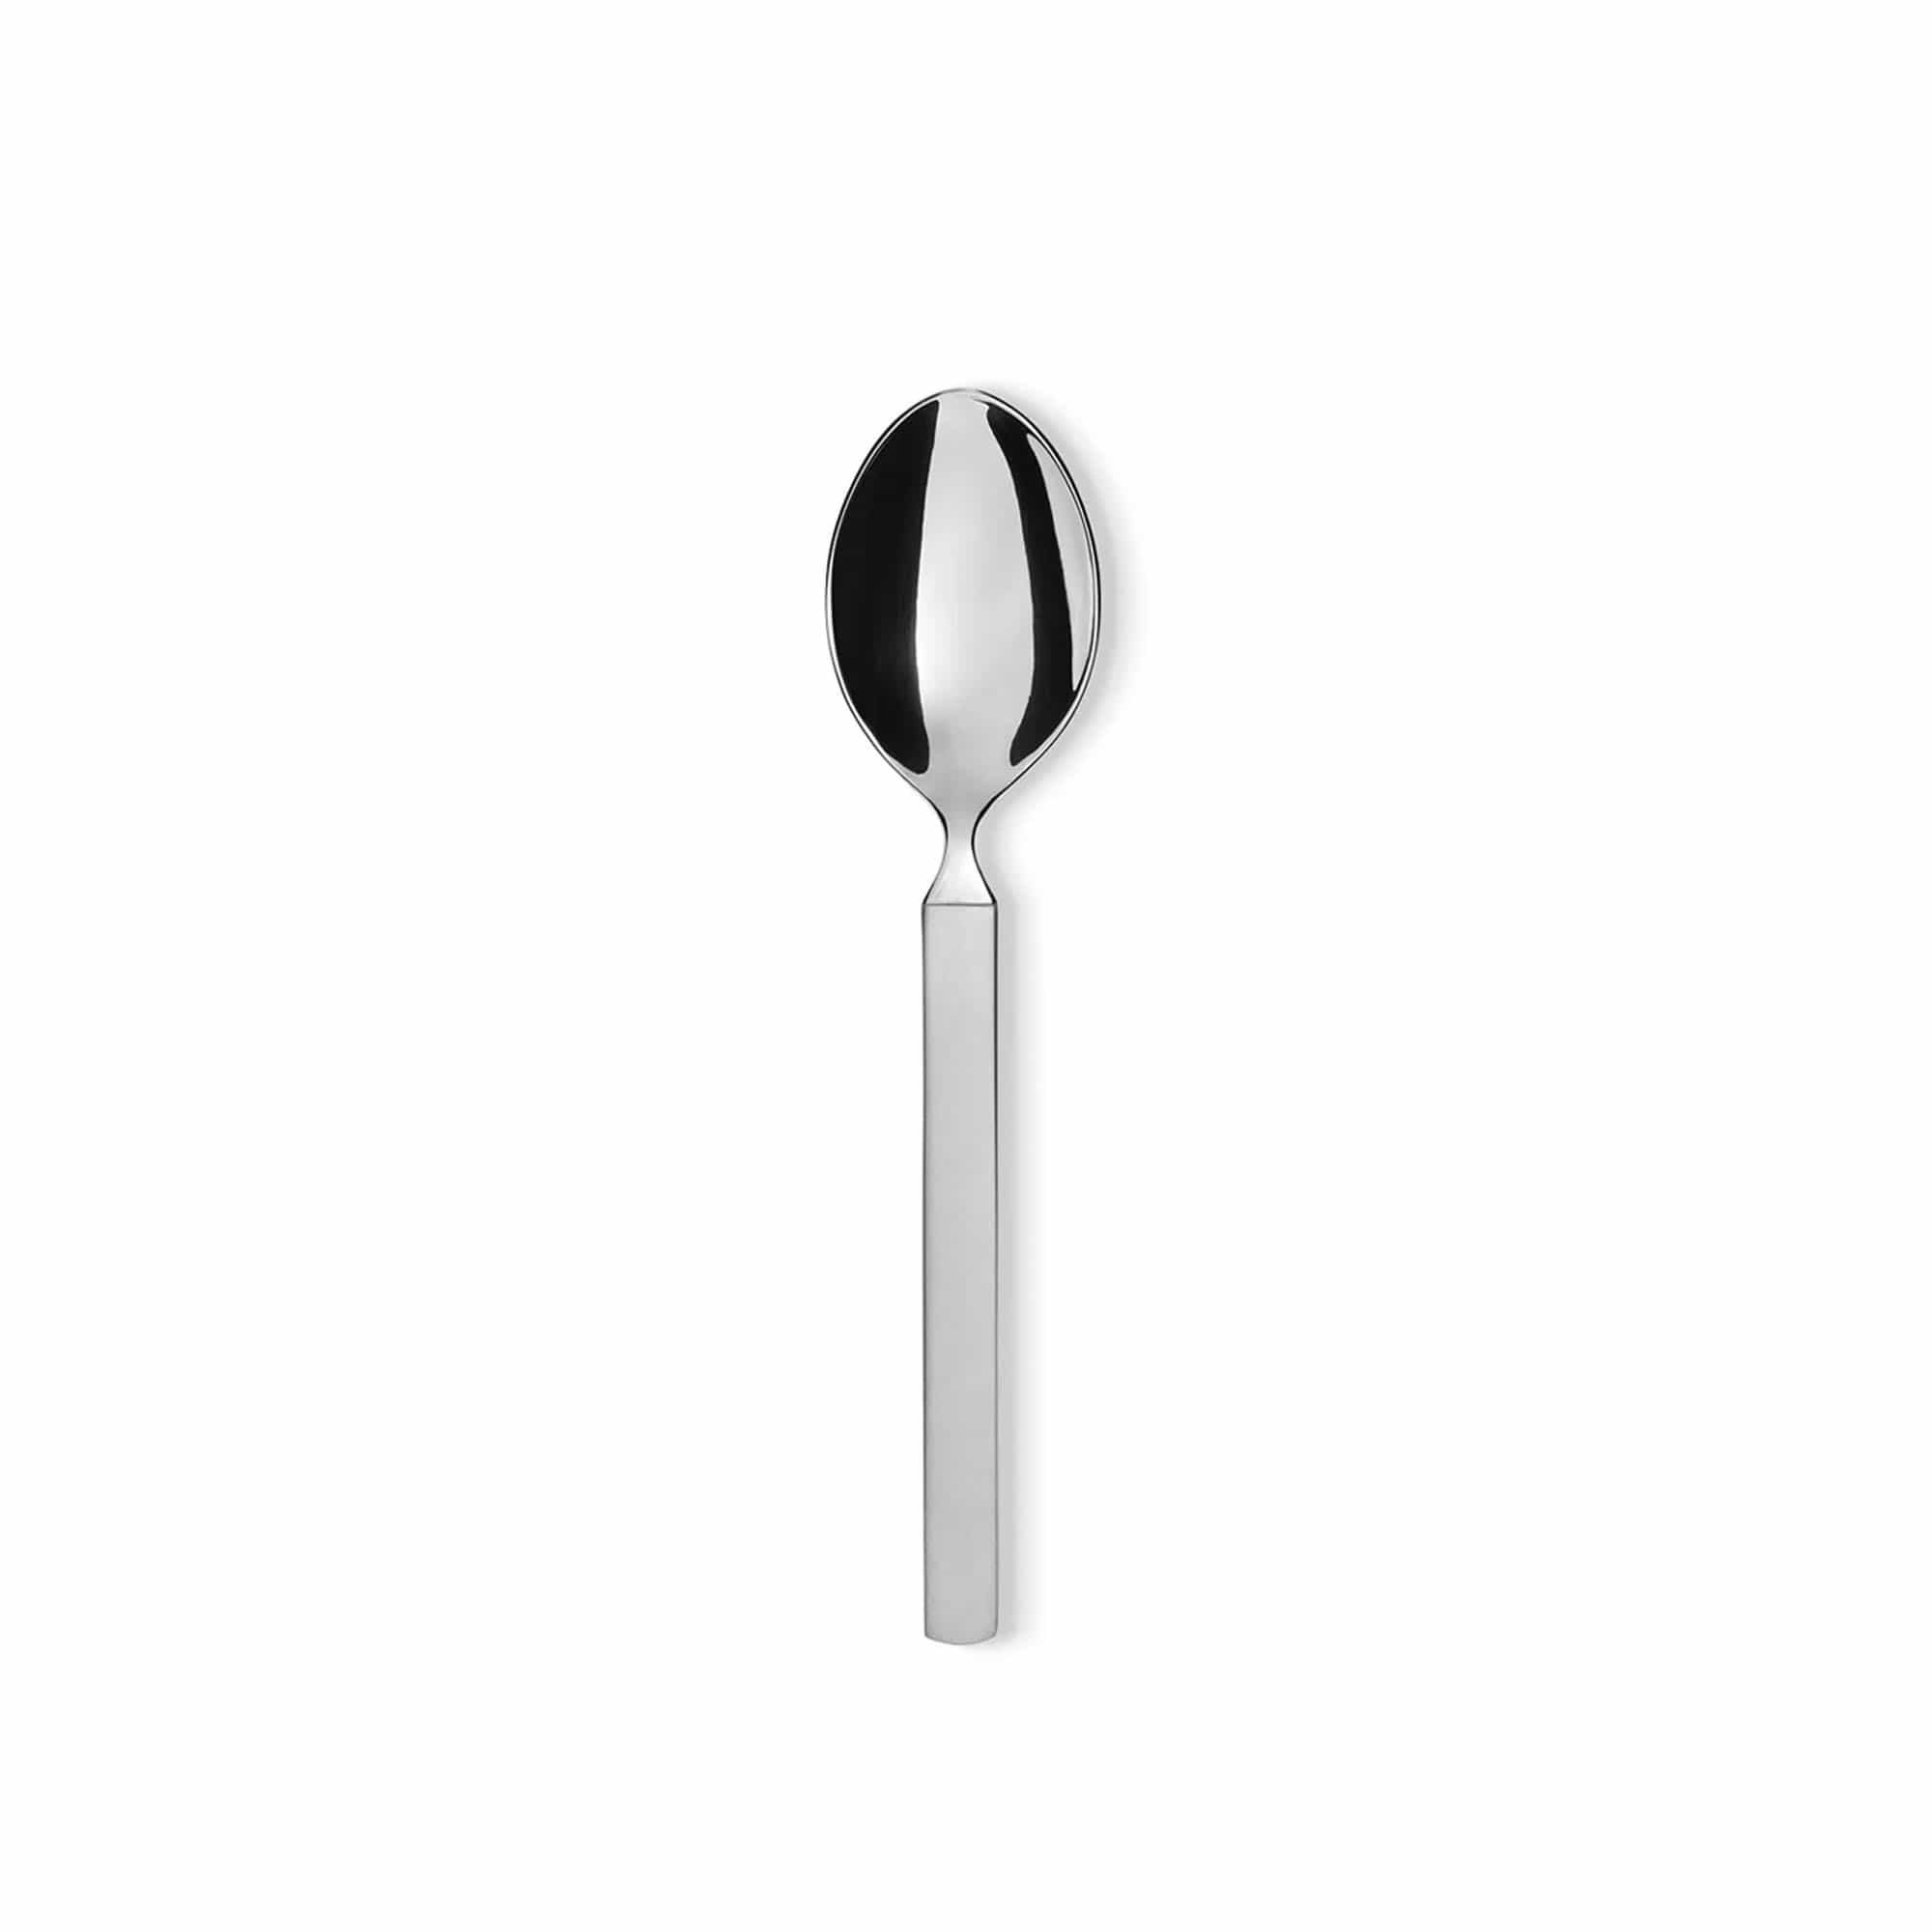 Dry Table spoon